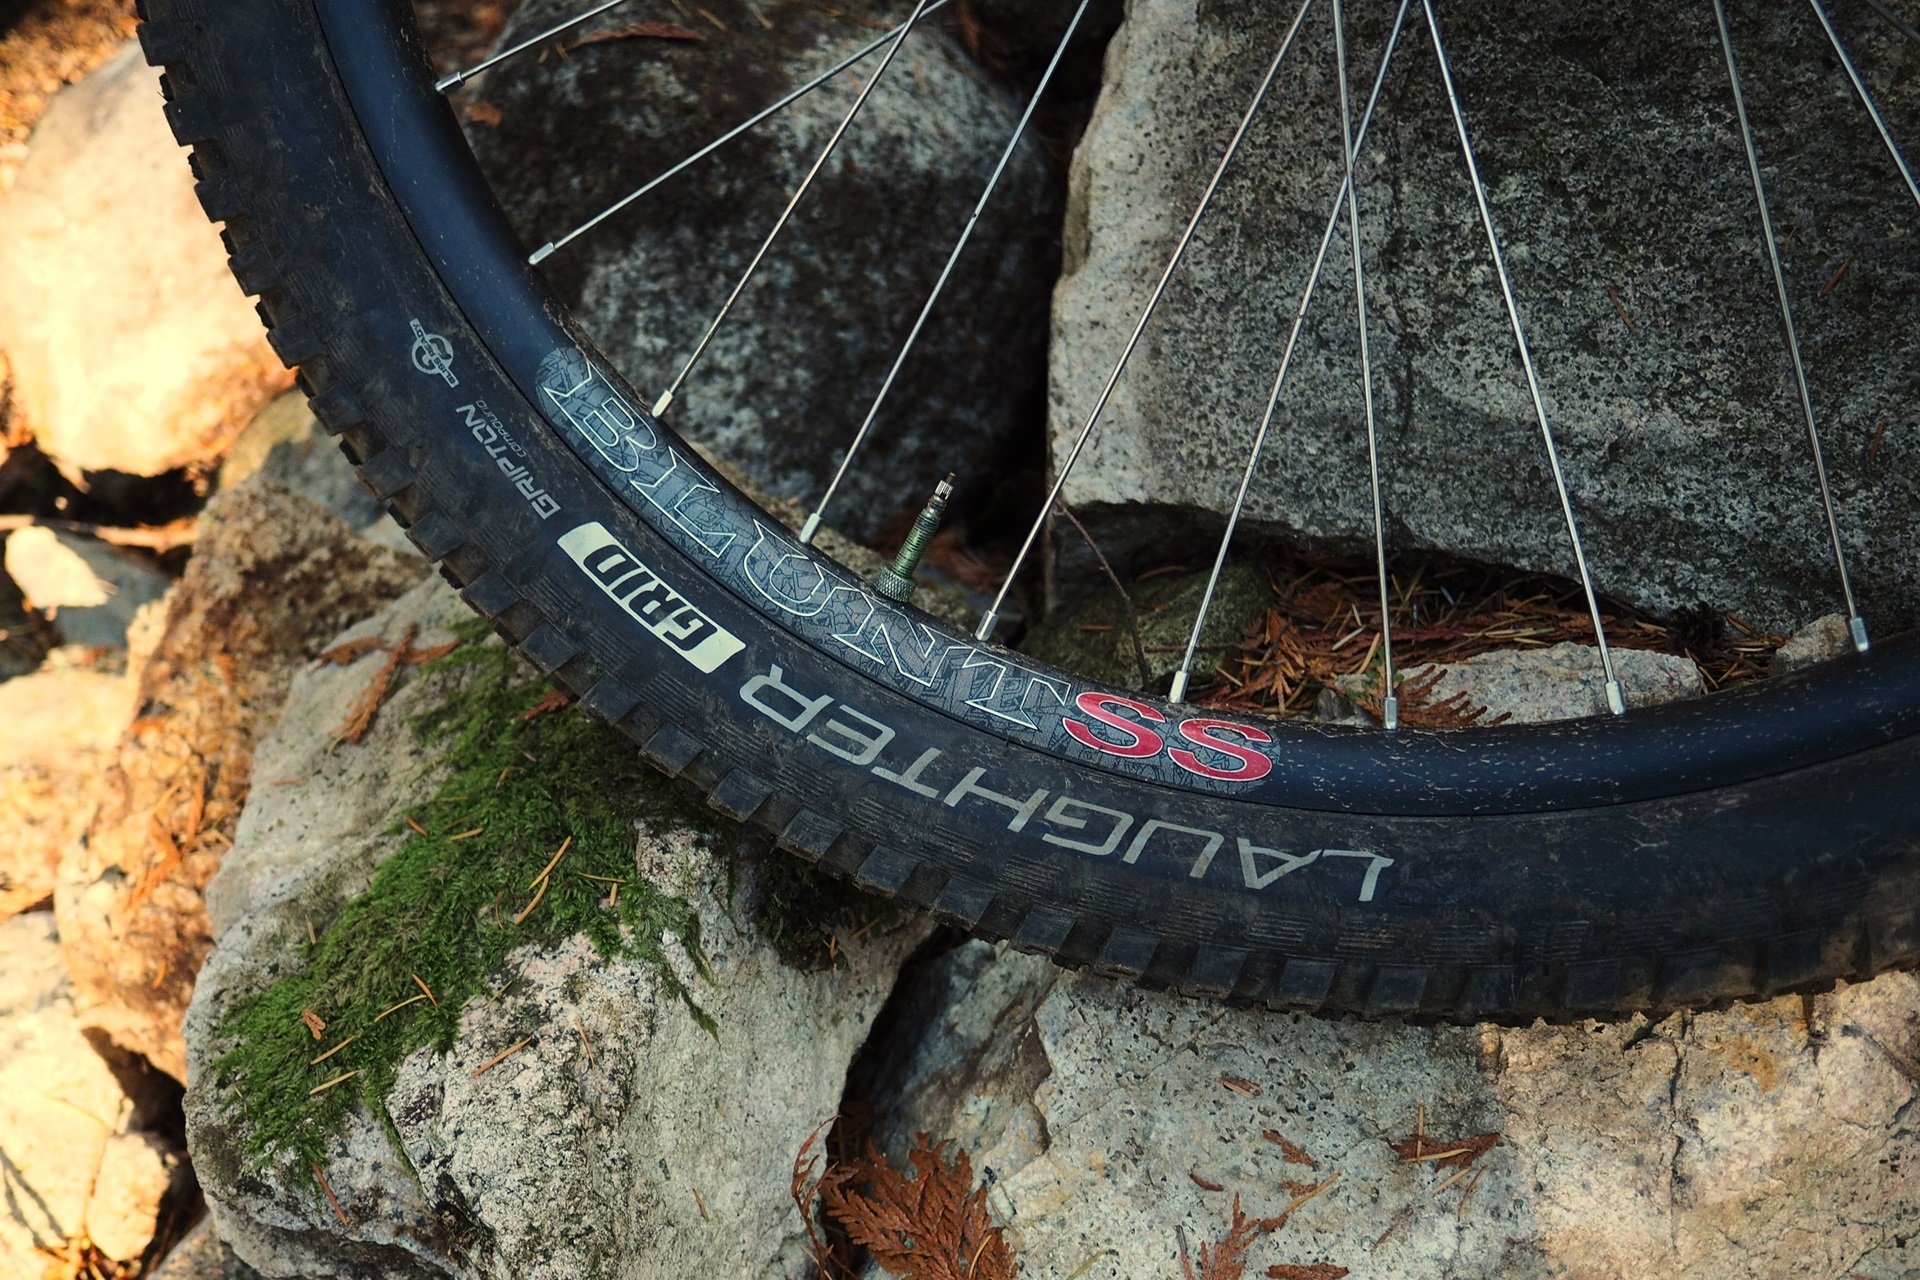 Cushcore Tire Insert Review: A Shocking Result On Gravel Roads